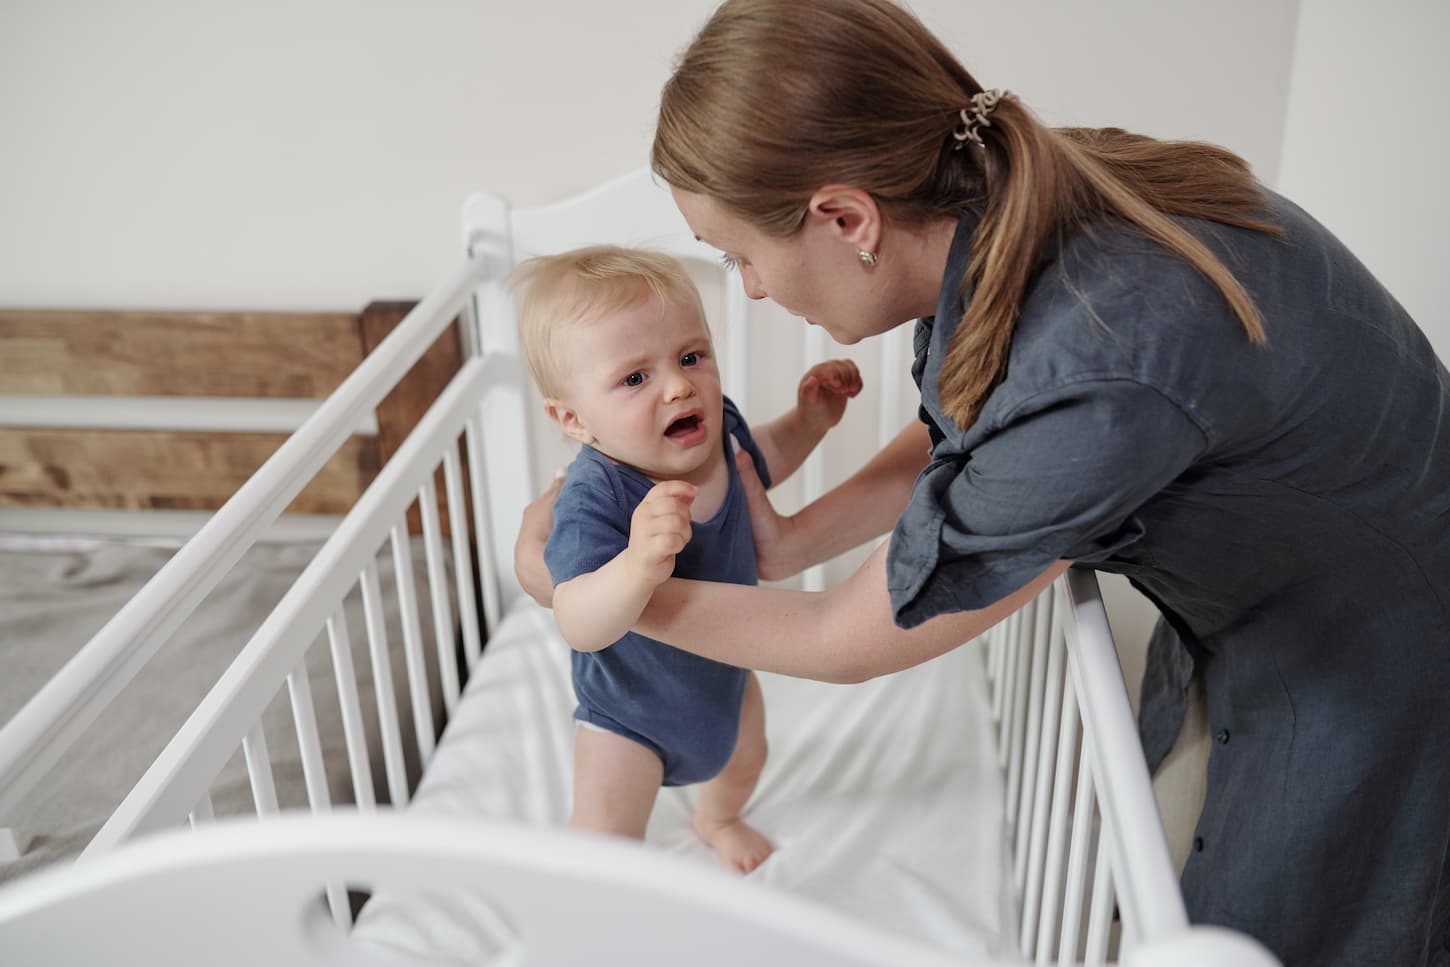 An image of a Young mother with a ponytail taking a frightened baby in her arms from a crib.